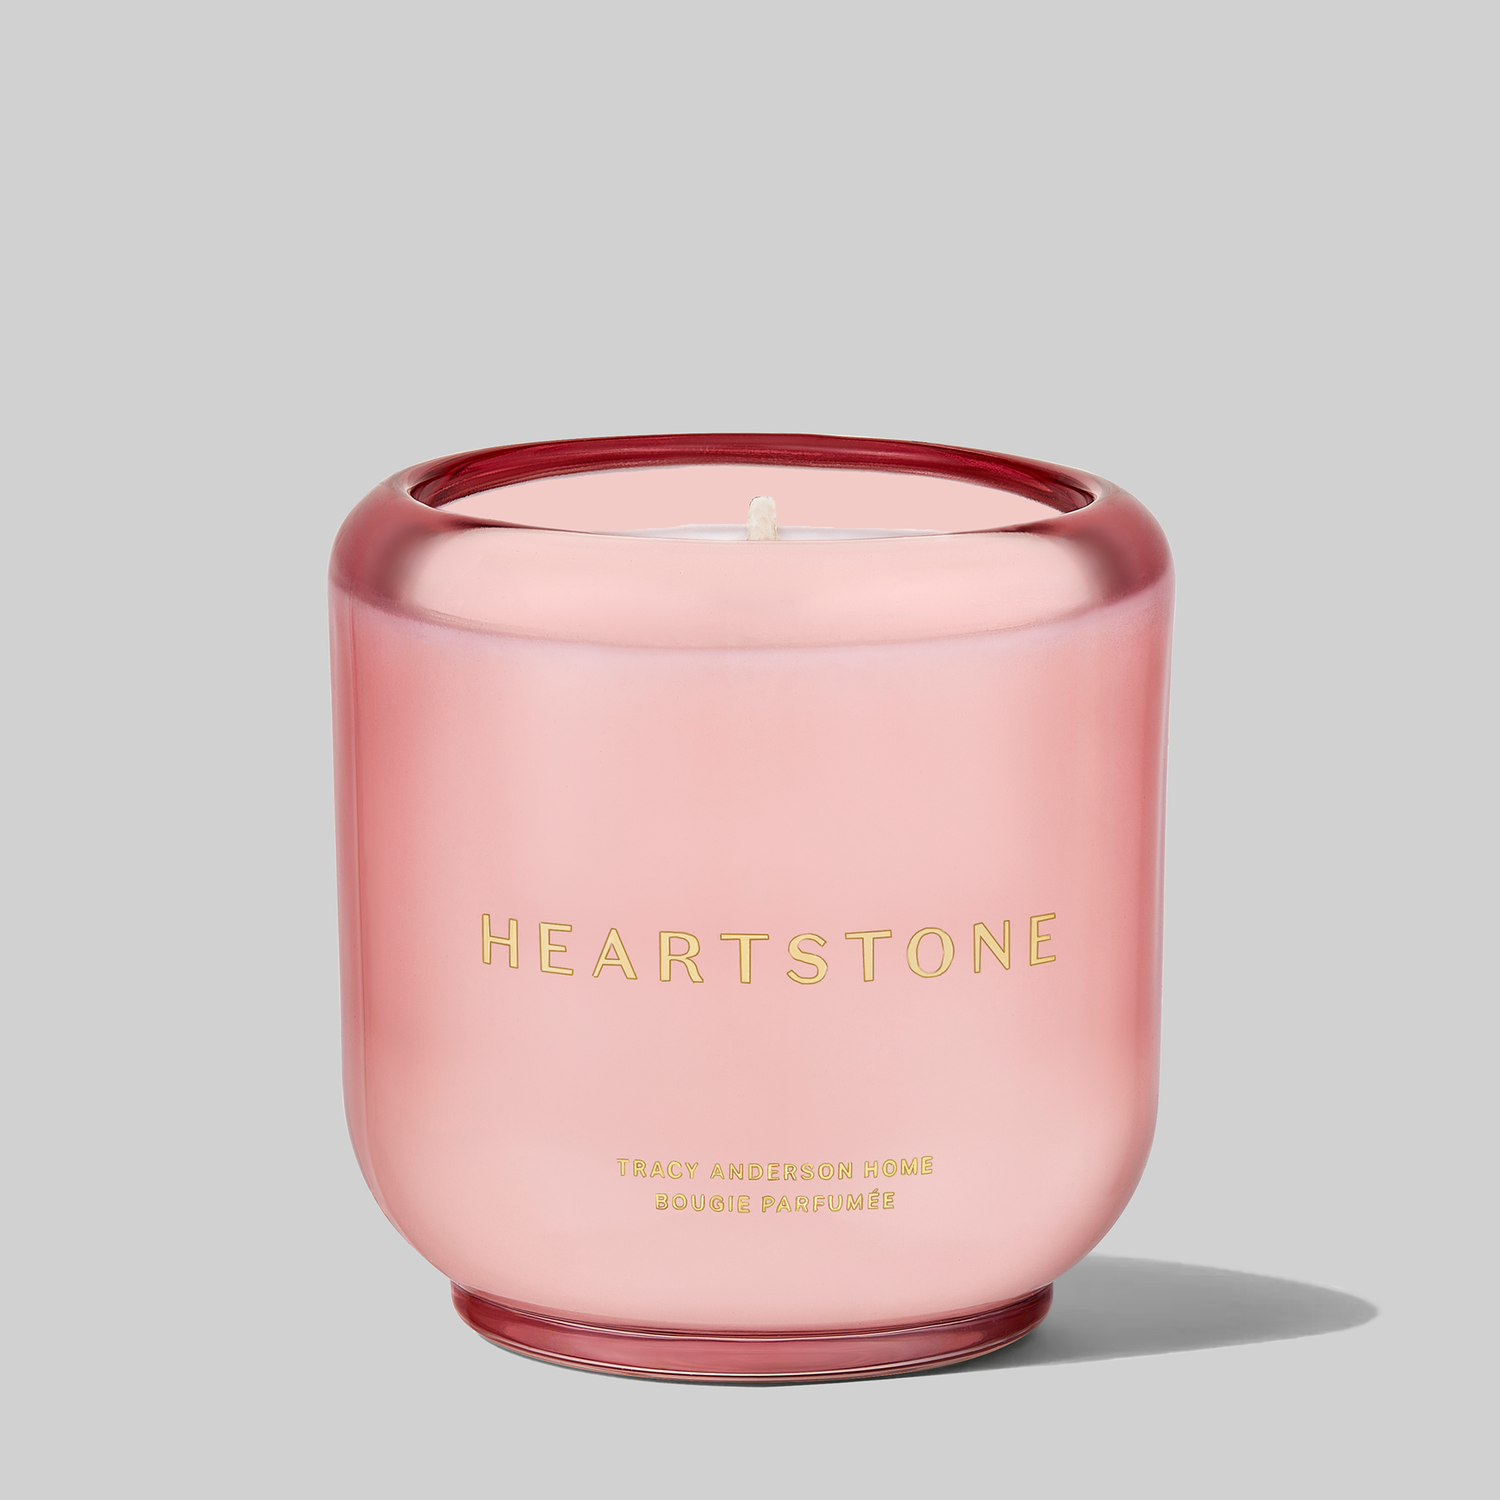 HEARTSTONE SCENTED CANDLE